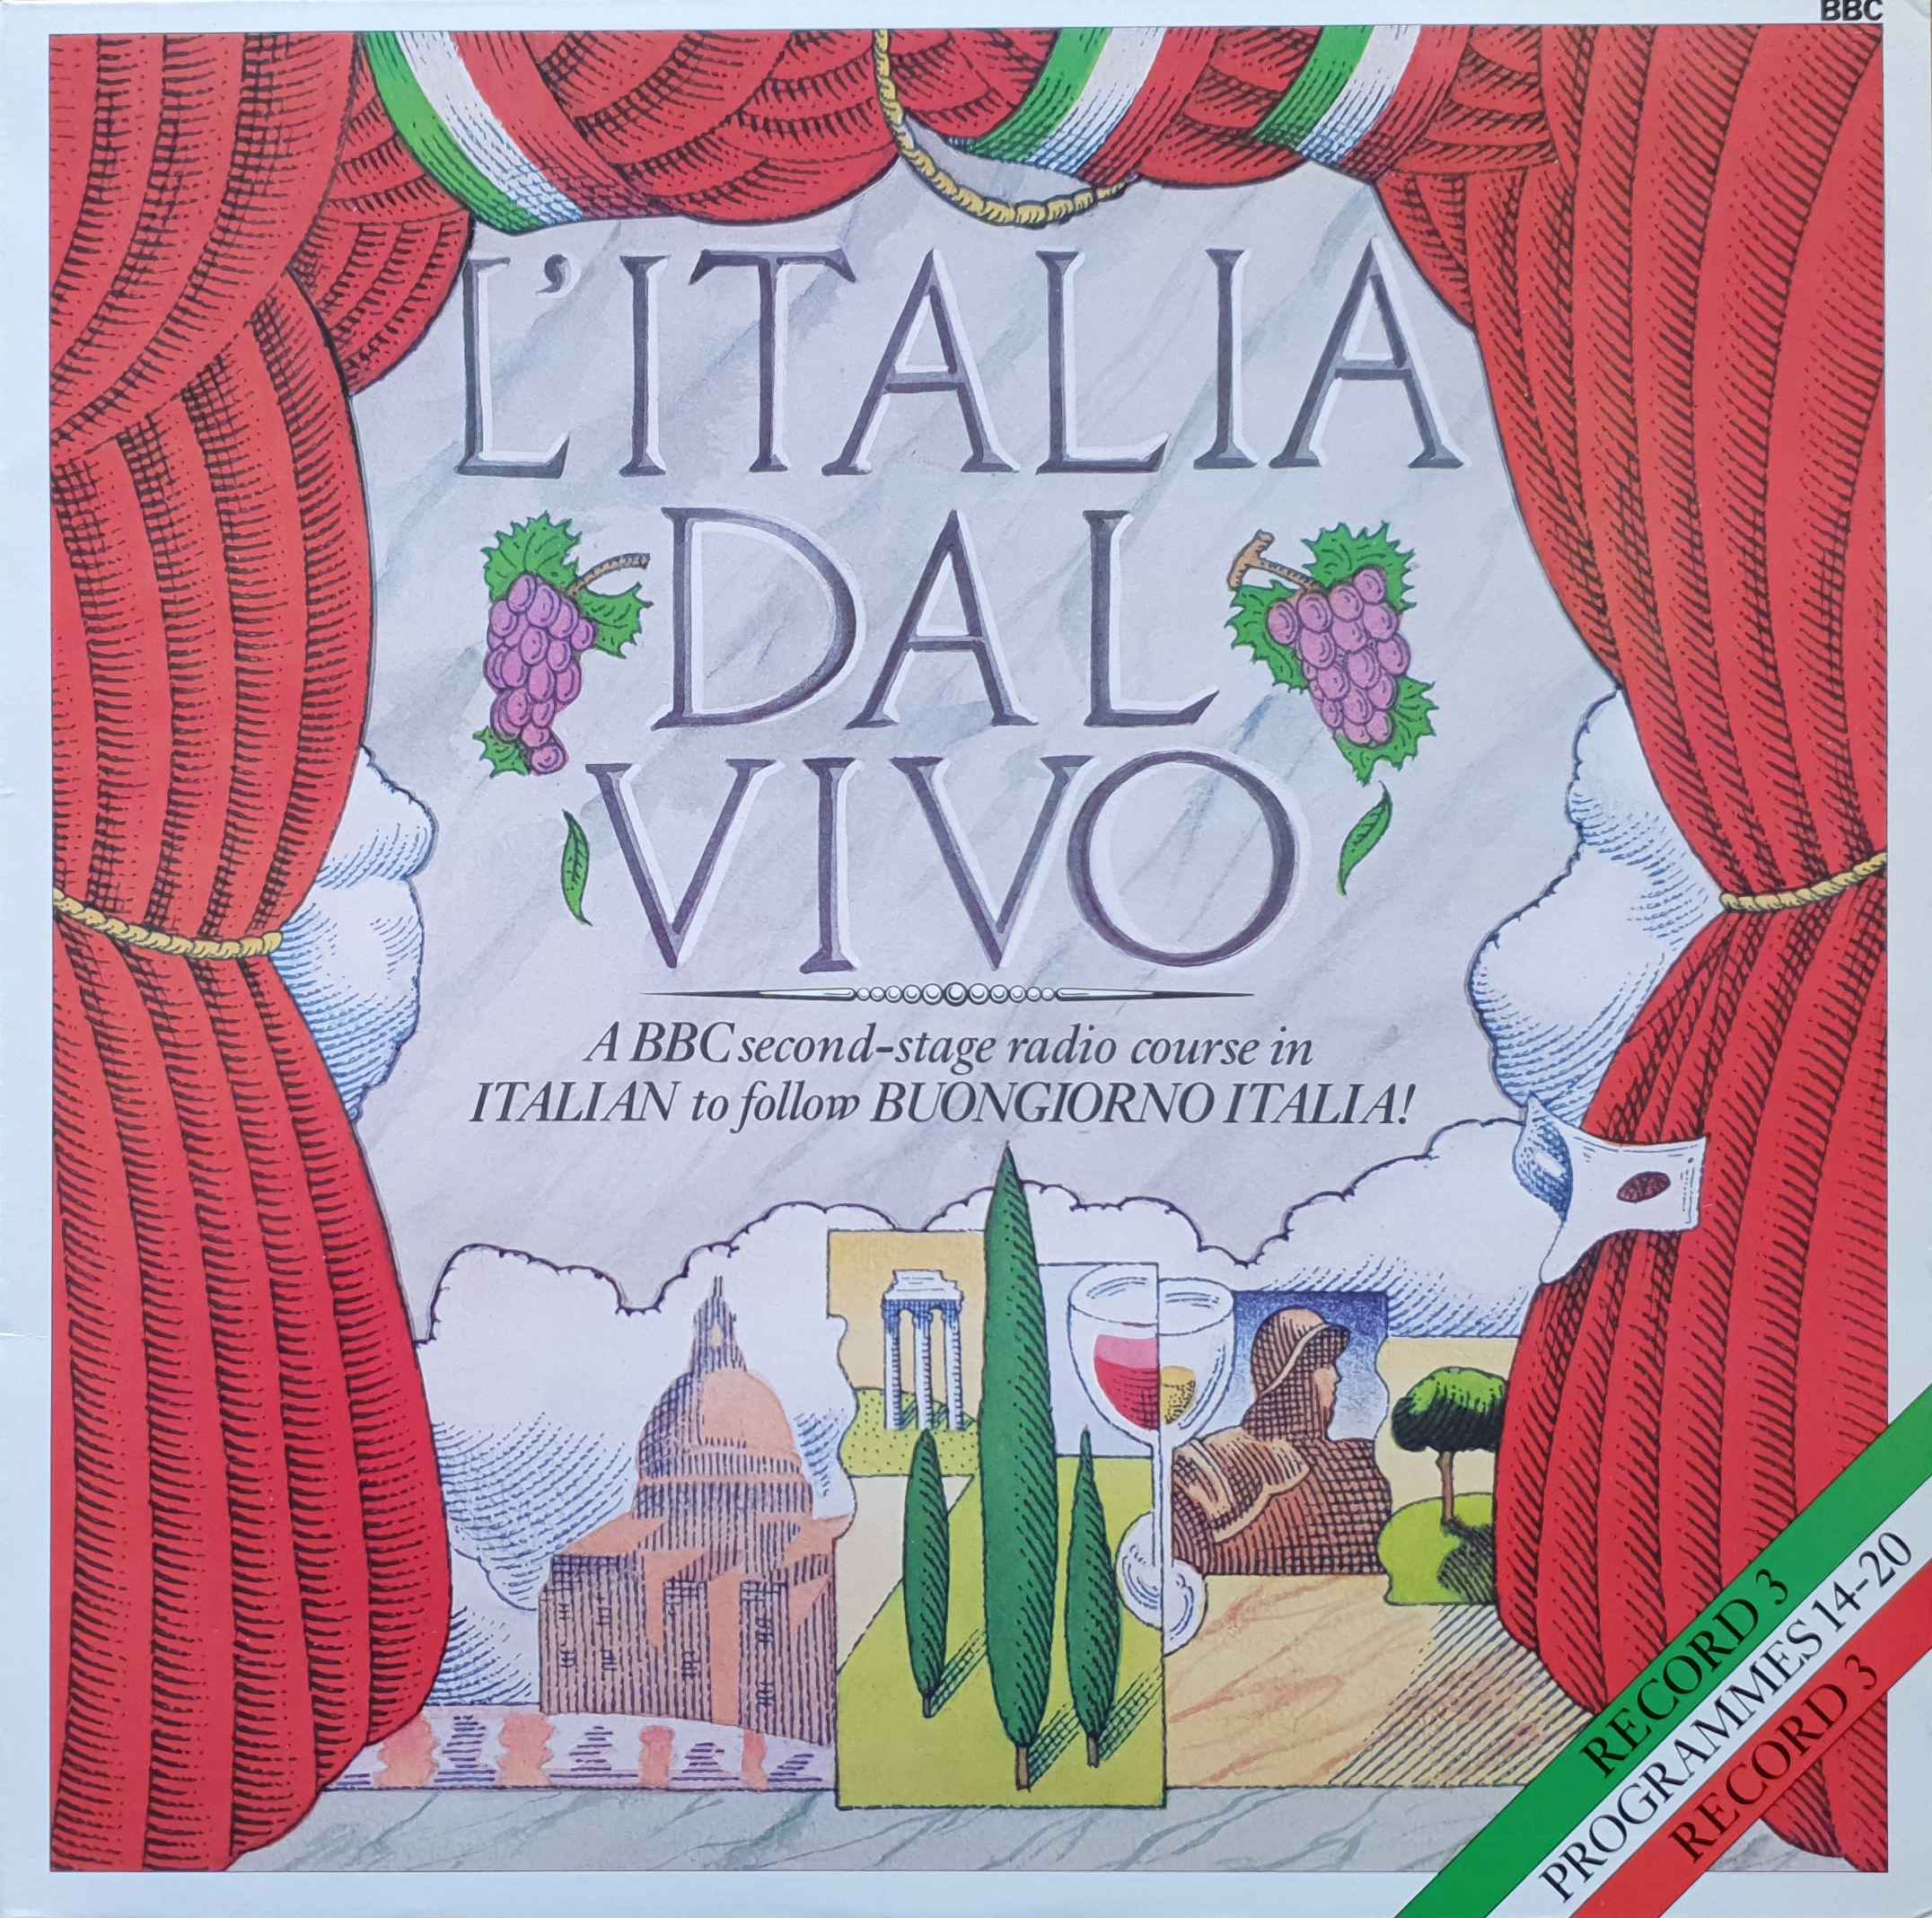 Picture of OP 268 L' Italia dal vivo - 14-20 by artist Various from the BBC albums - Records and Tapes library